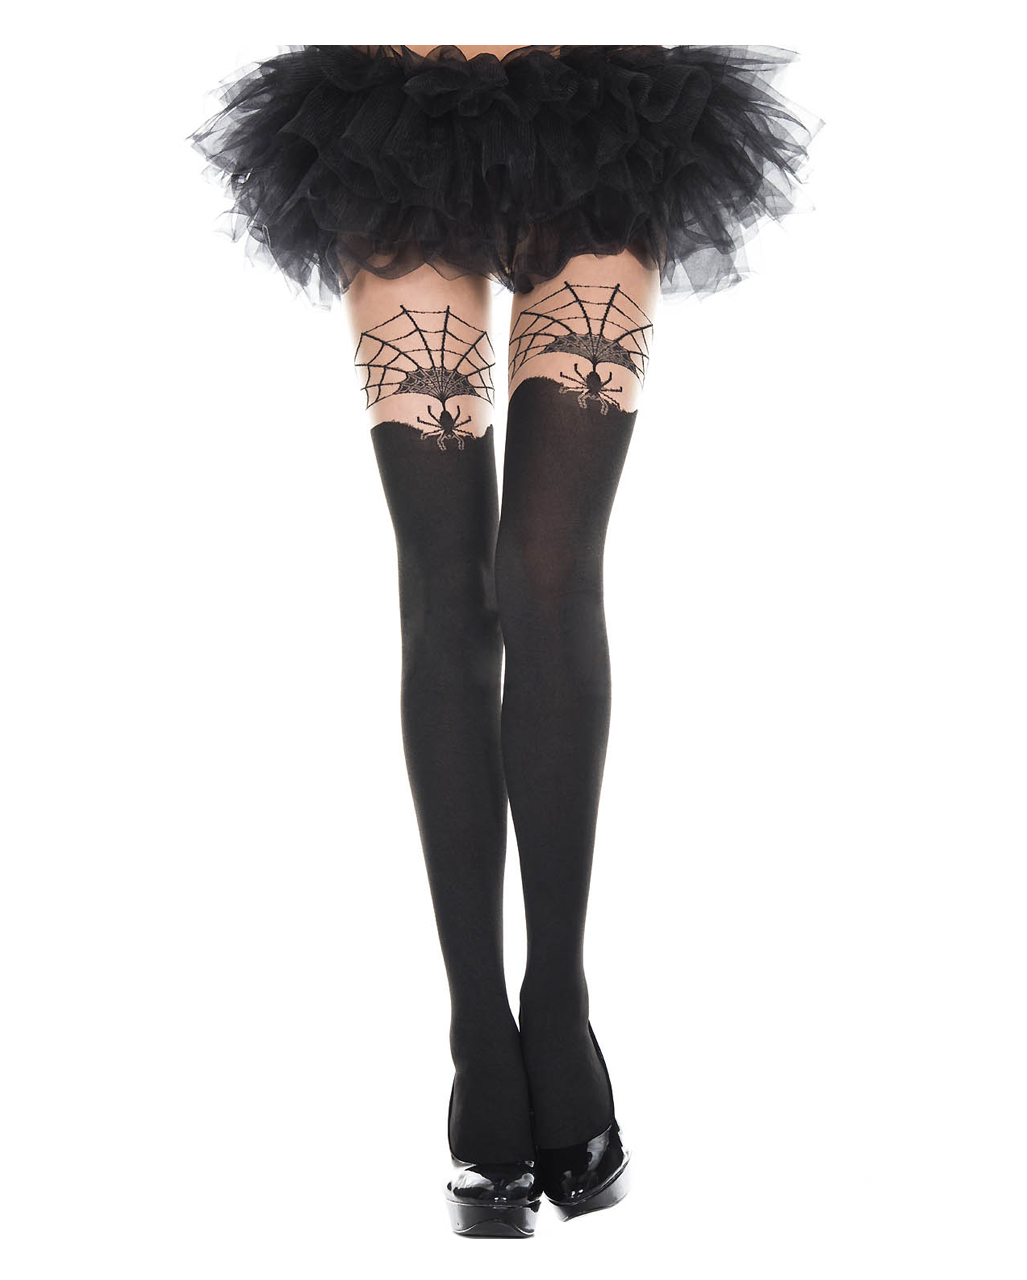 Bitsy Spider And Web Tights | Halloween Stockings | Horror-Shop.com